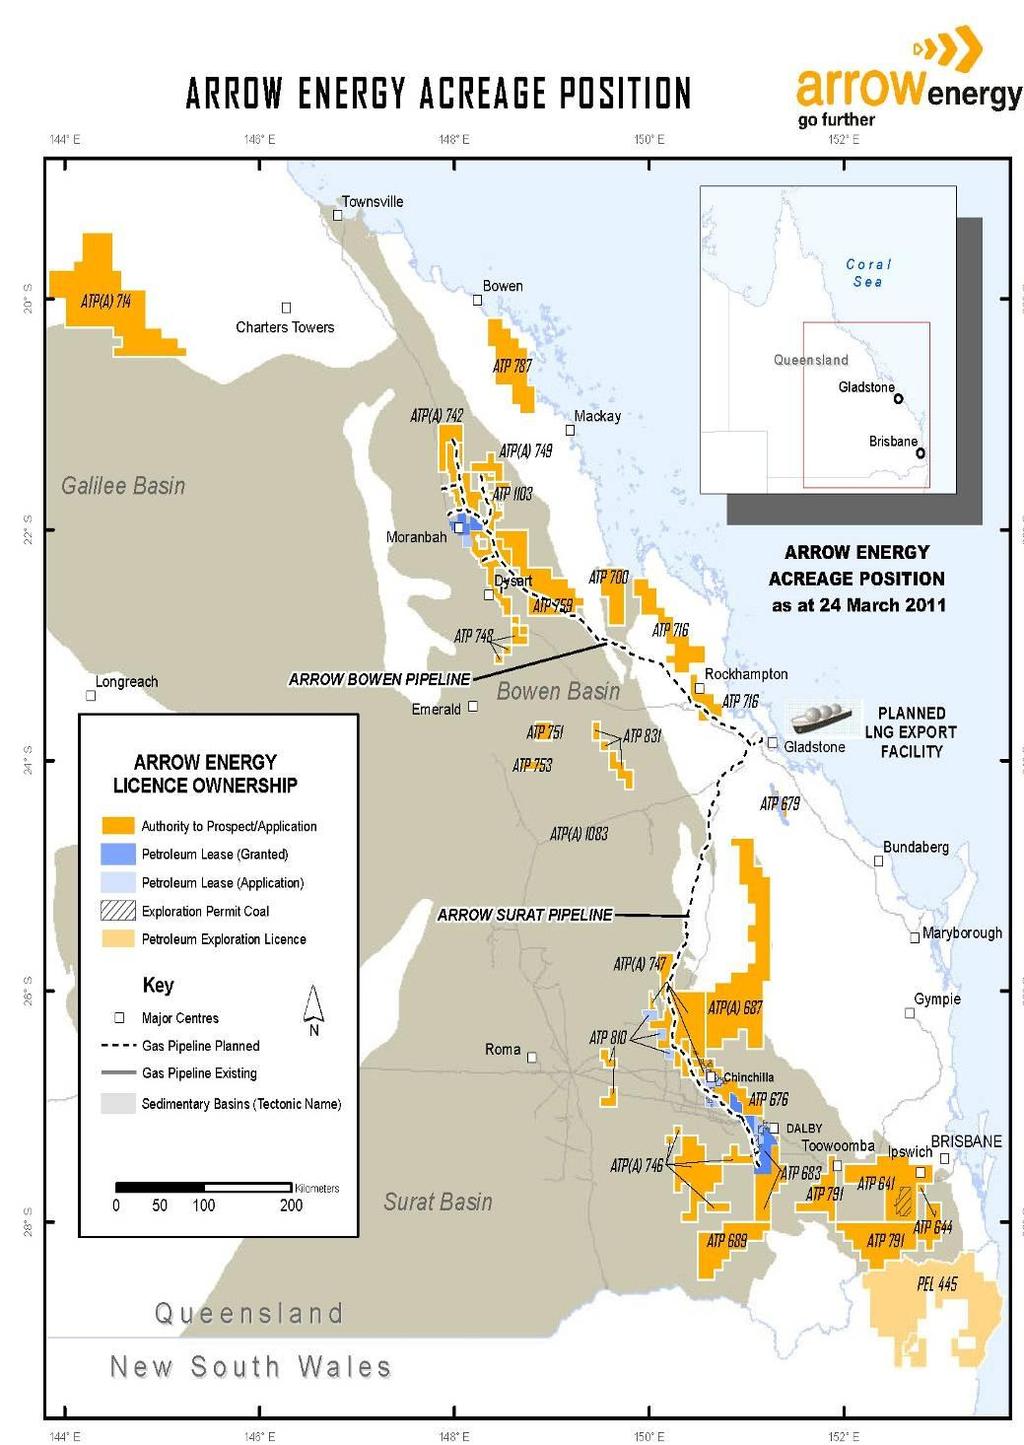 ARROW ENERGY COMPANY OVERVIEW Queensland based company started in 2000, first gas sales in 2004 Currently supplies >20% of gas & electricity needs of Queensland